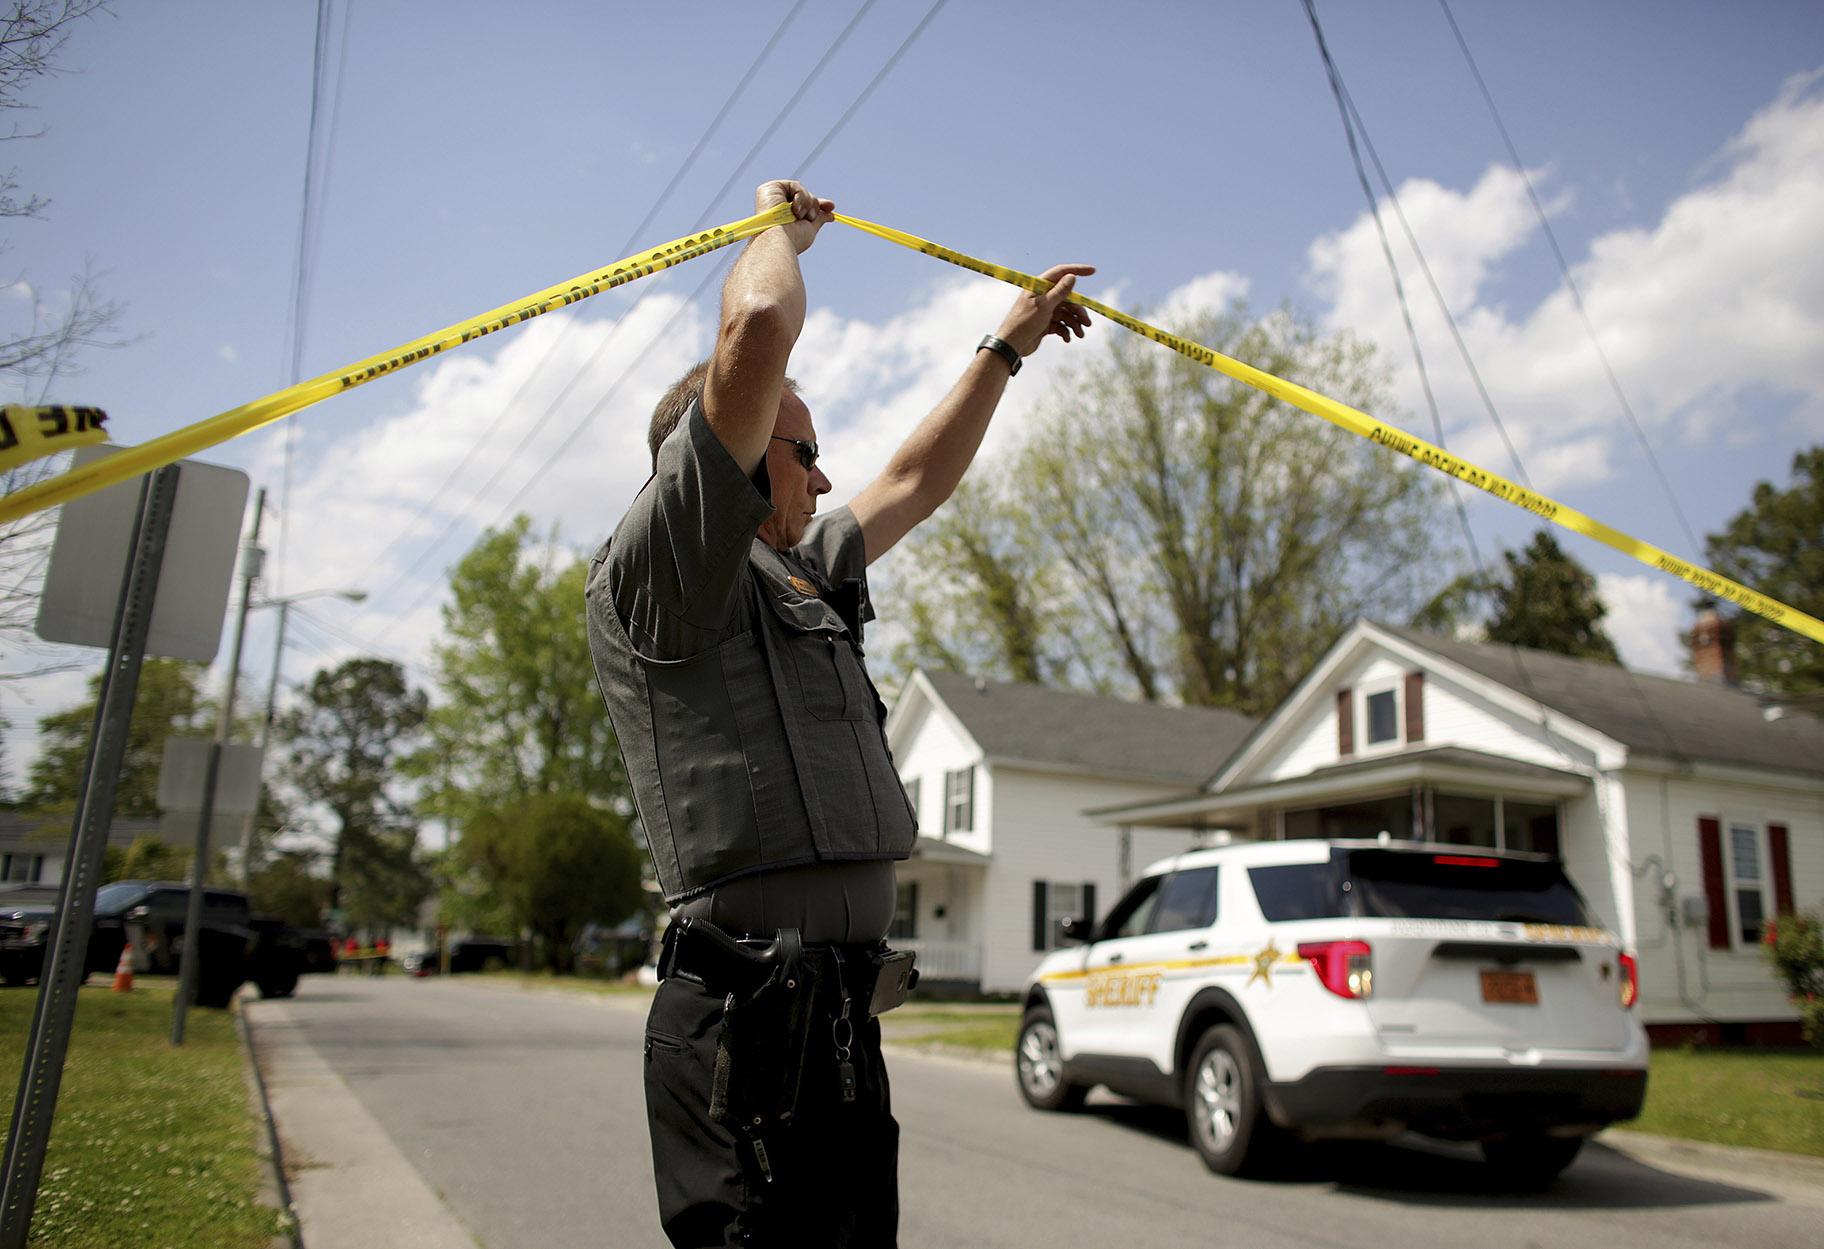 Law enforcement investigate the scene of a shooting, Wednesday, April 21, 2021 in Elizabeth City, N.C. At least one law enforcement officer with a sheriff’s department in North Carolina shot and killed a man while executing a search warrant Wednesday, the sheriff’s office said. (Stephen M. Katz / The Virginian-Pilot via AP)